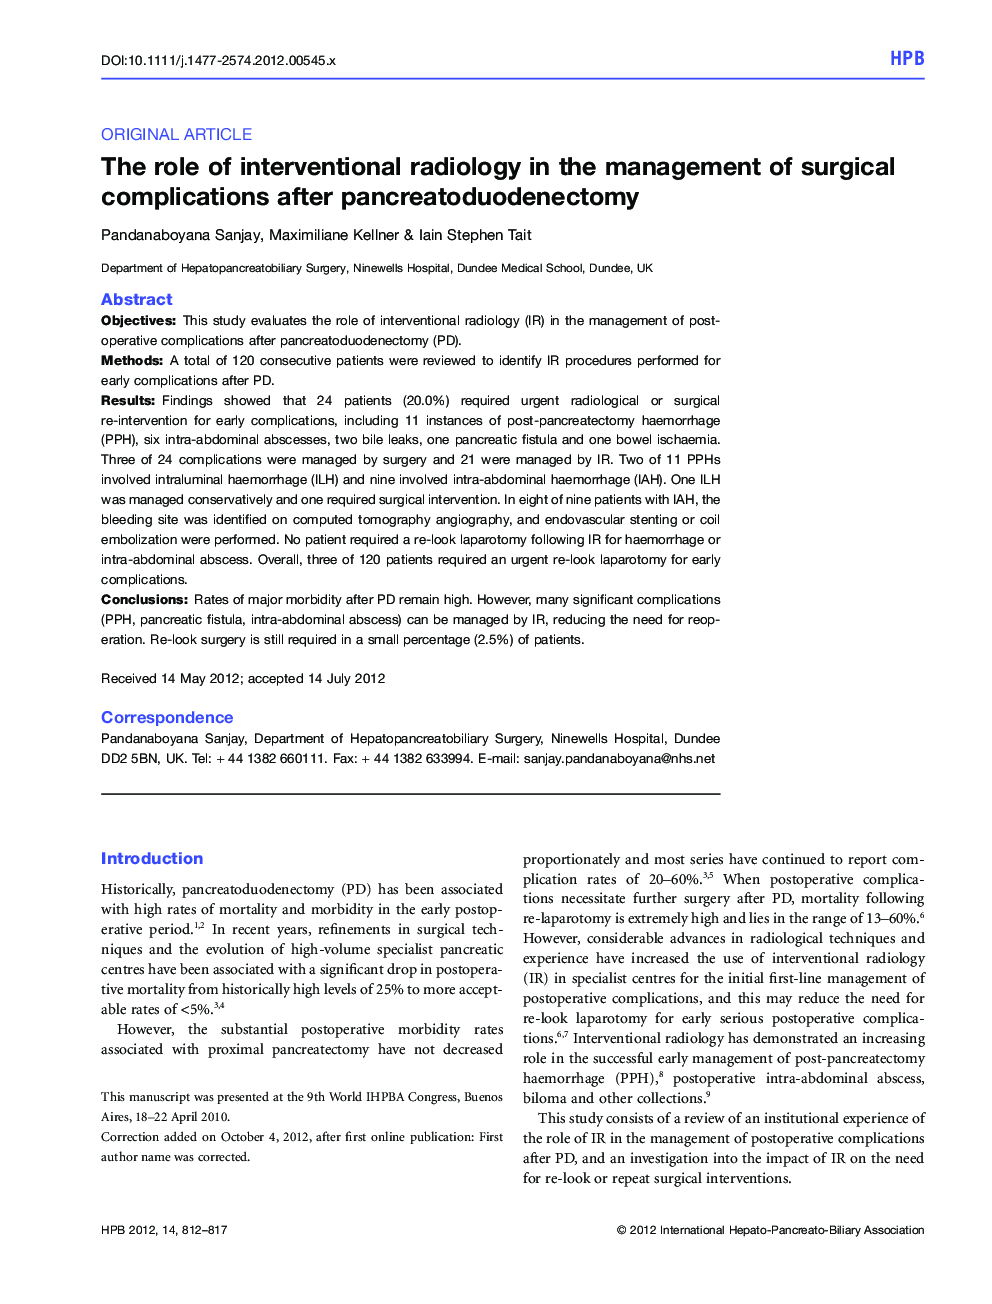 The role of interventional radiology in the management of surgical complications after pancreatoduodenectomy